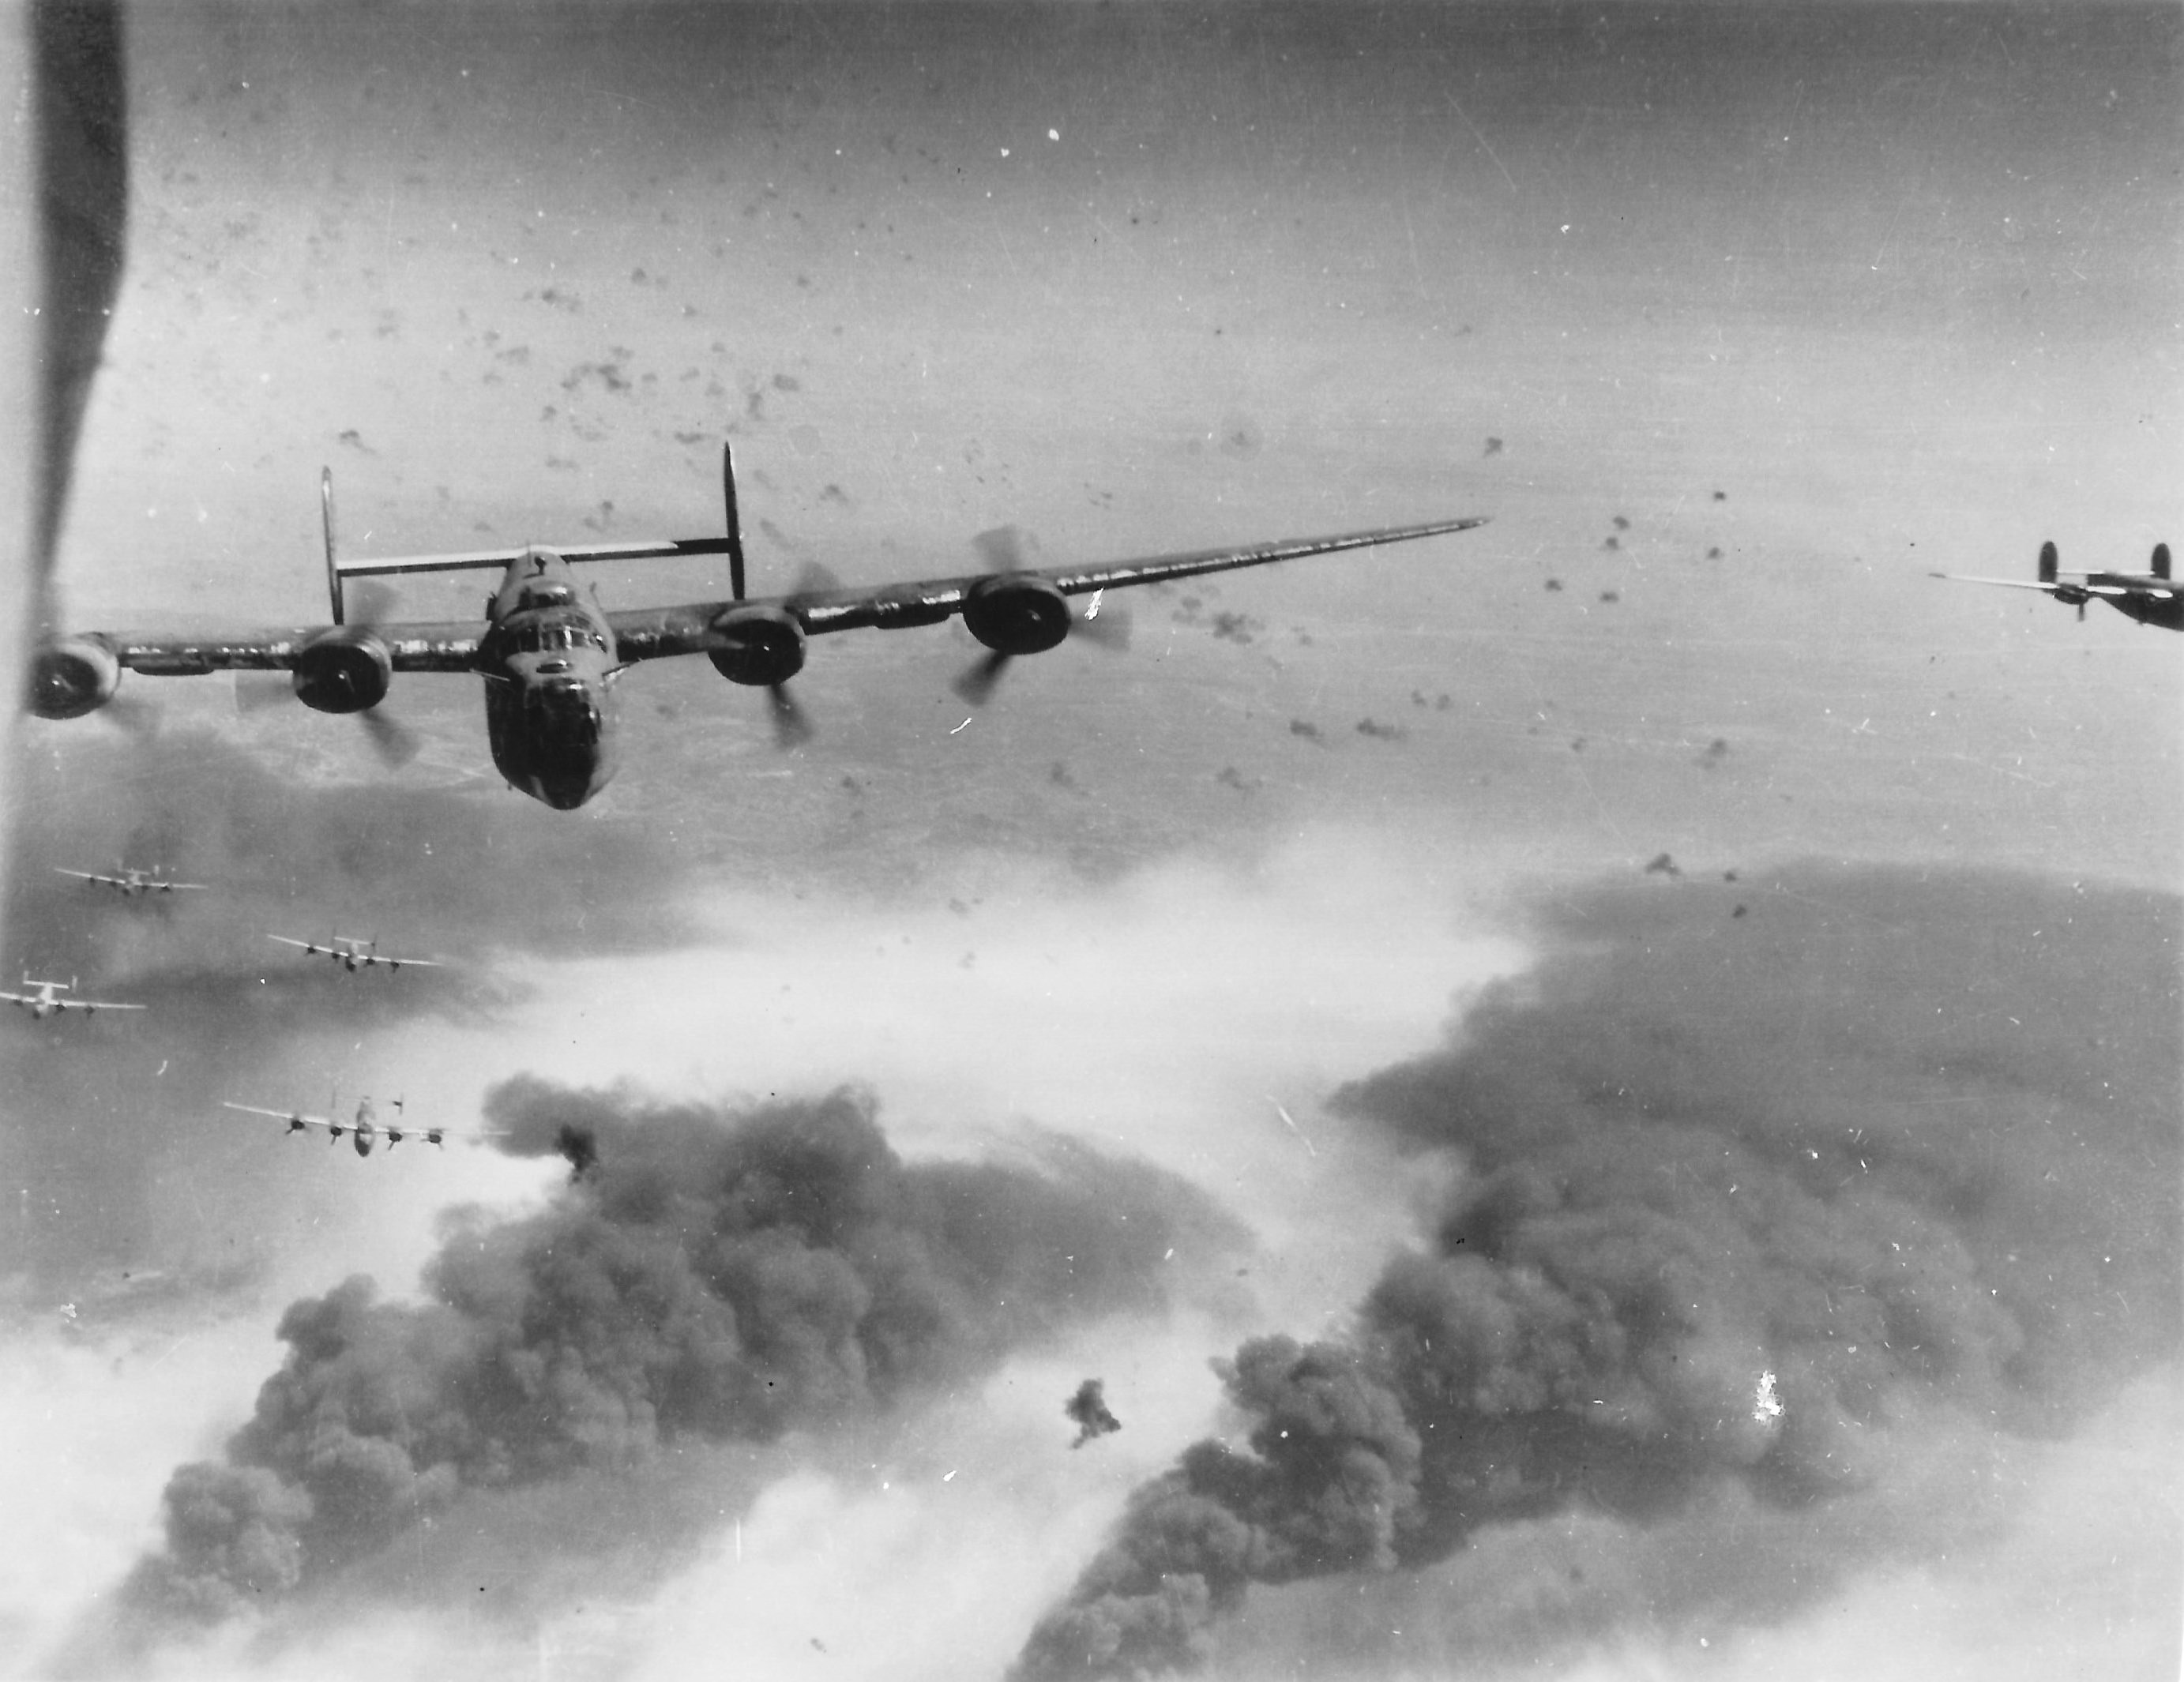 B-24 Liberator bombers of the 451st Bomb Group flying from Italy over Ploesti oil fields, Romania, May-Aug 1944. Photo 2 of 2.